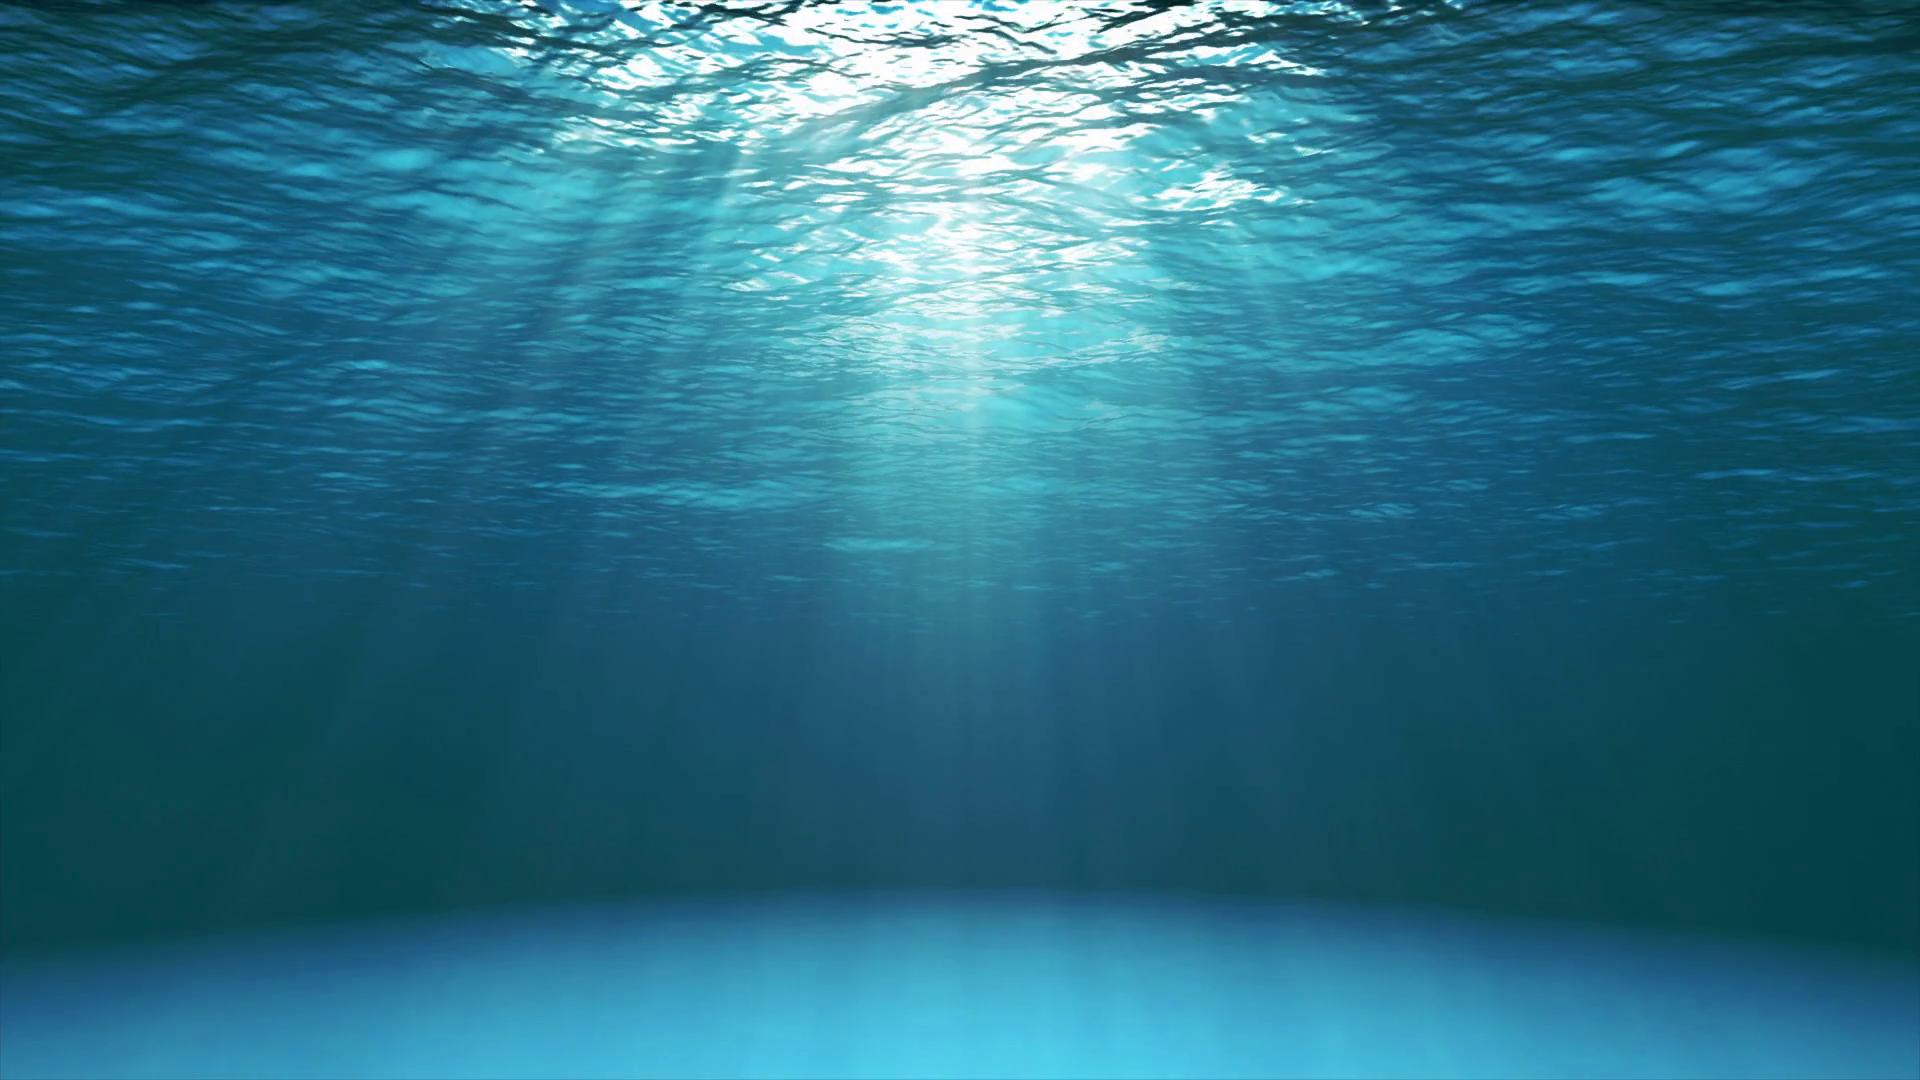 Free photo: Underwater - Blue, Clear, Sea - Free Download ...